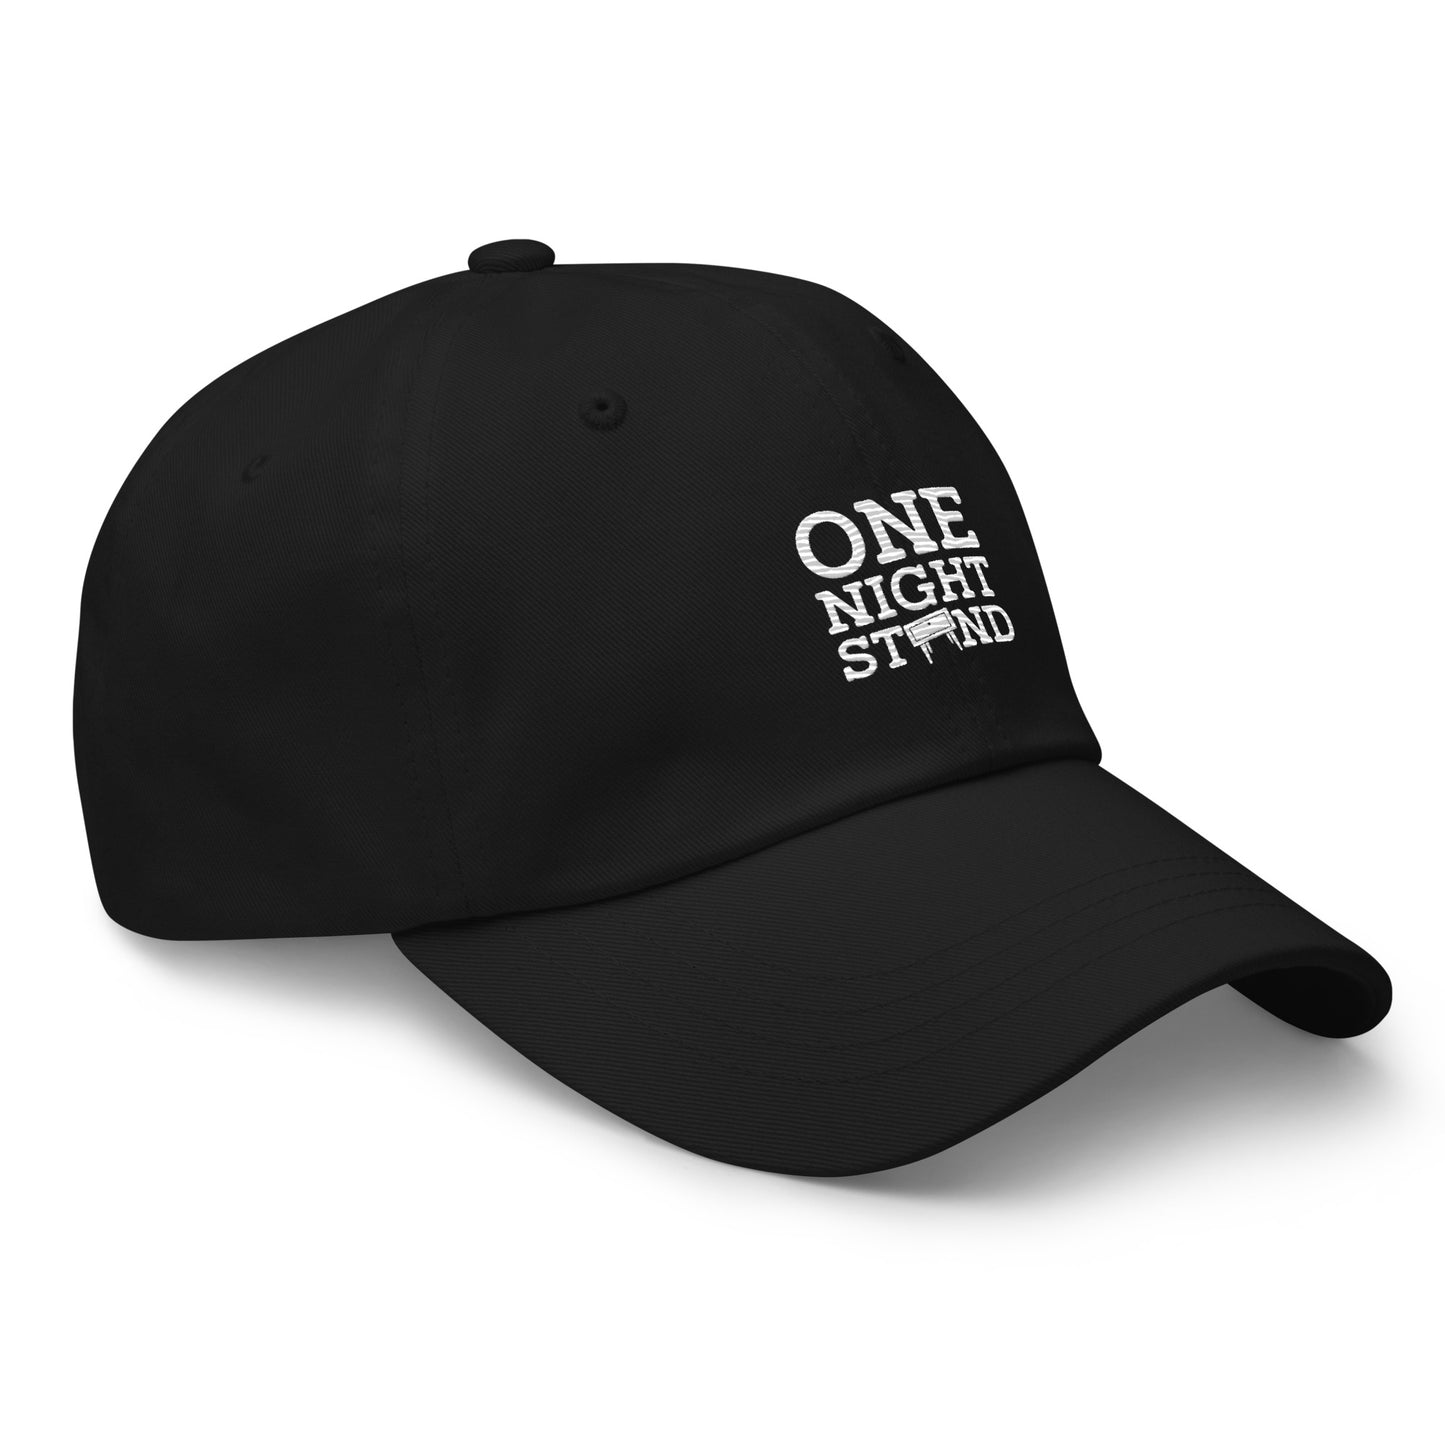 One Night Stand Dad hat